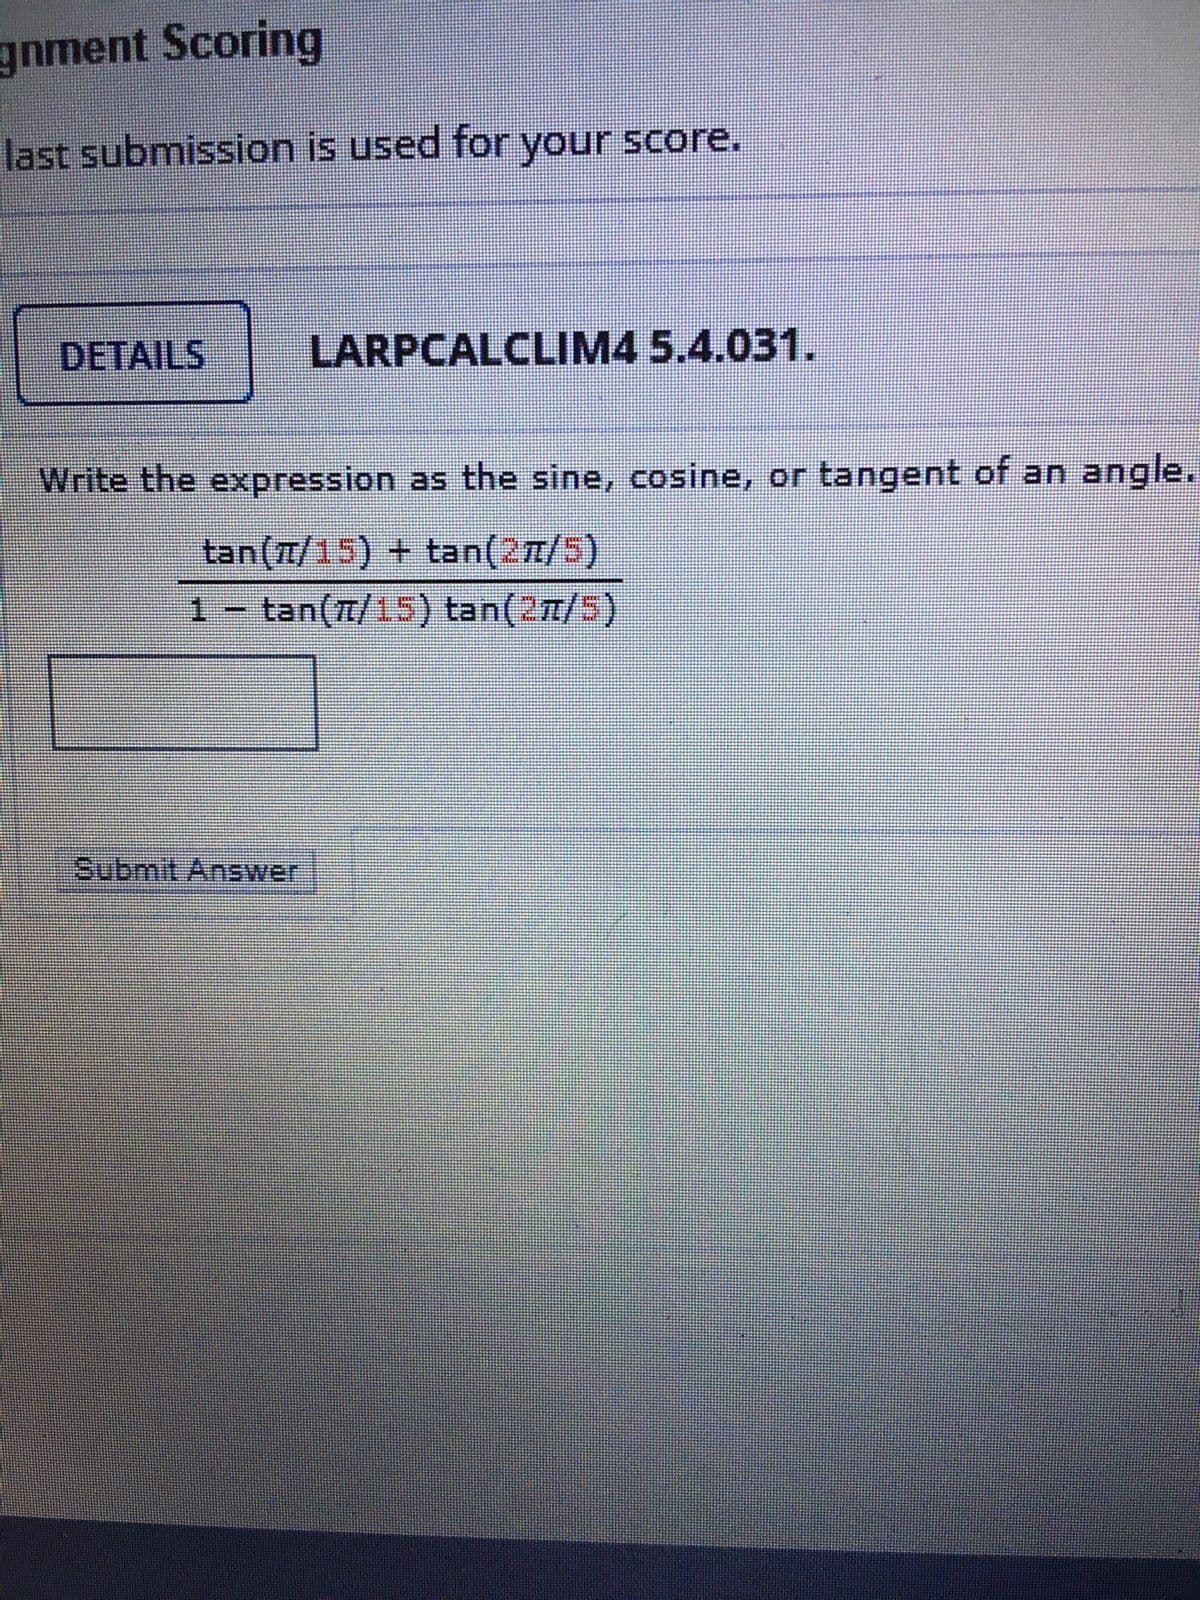 gnment Scoring
last submission is used for your score.
DETAILS
LARPCALCLIM4 5.4.031.
Write the expression as the sine, cosine, or tangent of an angle.
1- tan(7/15) tan(27/5)
Submit Answer
